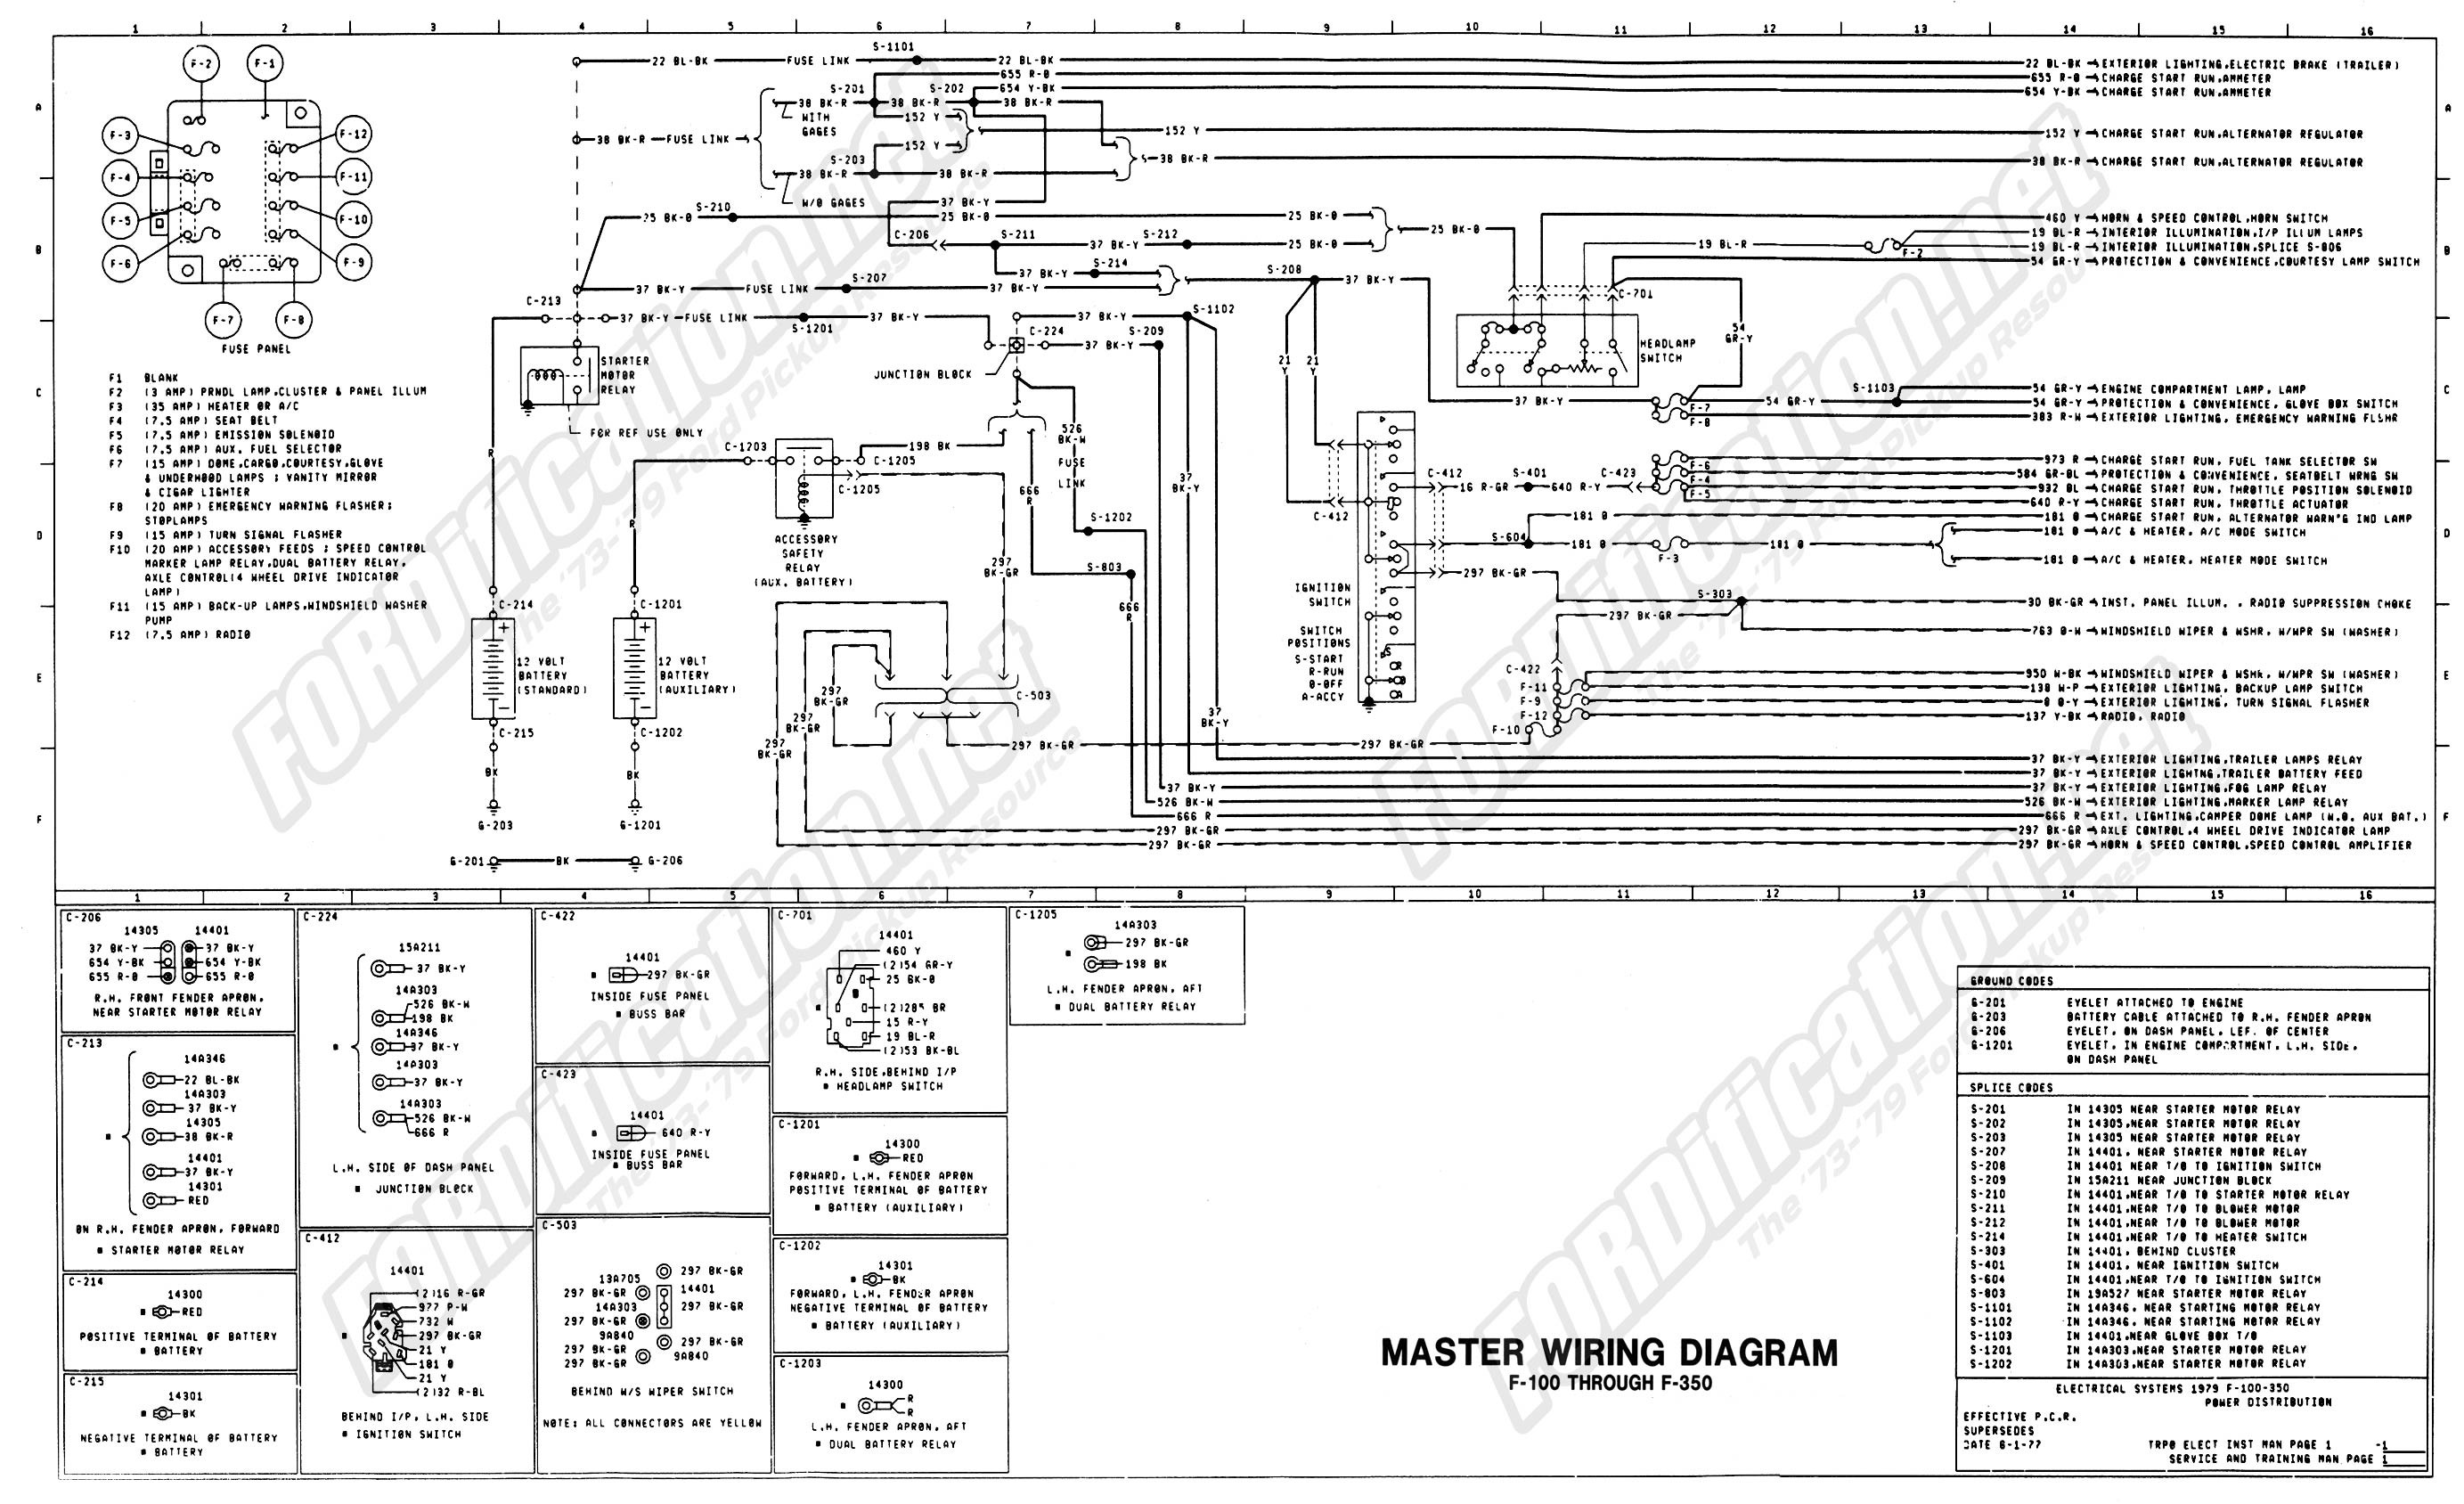 2000 ford F250 Rear Tail Light Wiring 1973 1979 ford Truck Wiring Diagrams & Schematics Of 2000 ford F250 Rear Tail Light Wiring